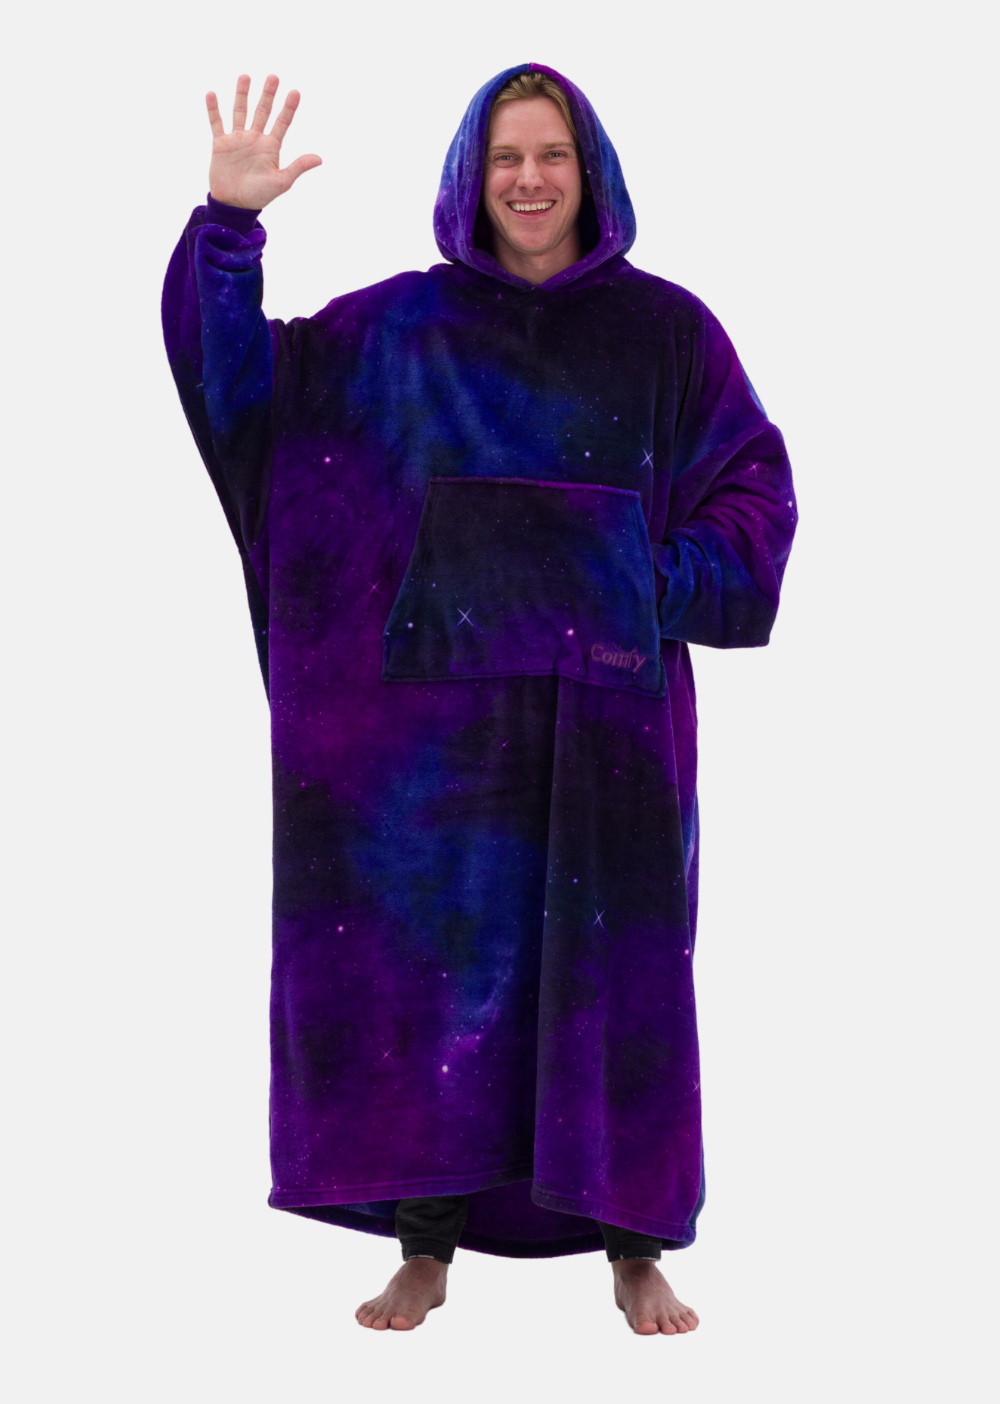 The Comfy Dream Long, Lightweight Floor Lenght Microfiber Fleece Wearable Blanket, One Size Fits All, Galaxy